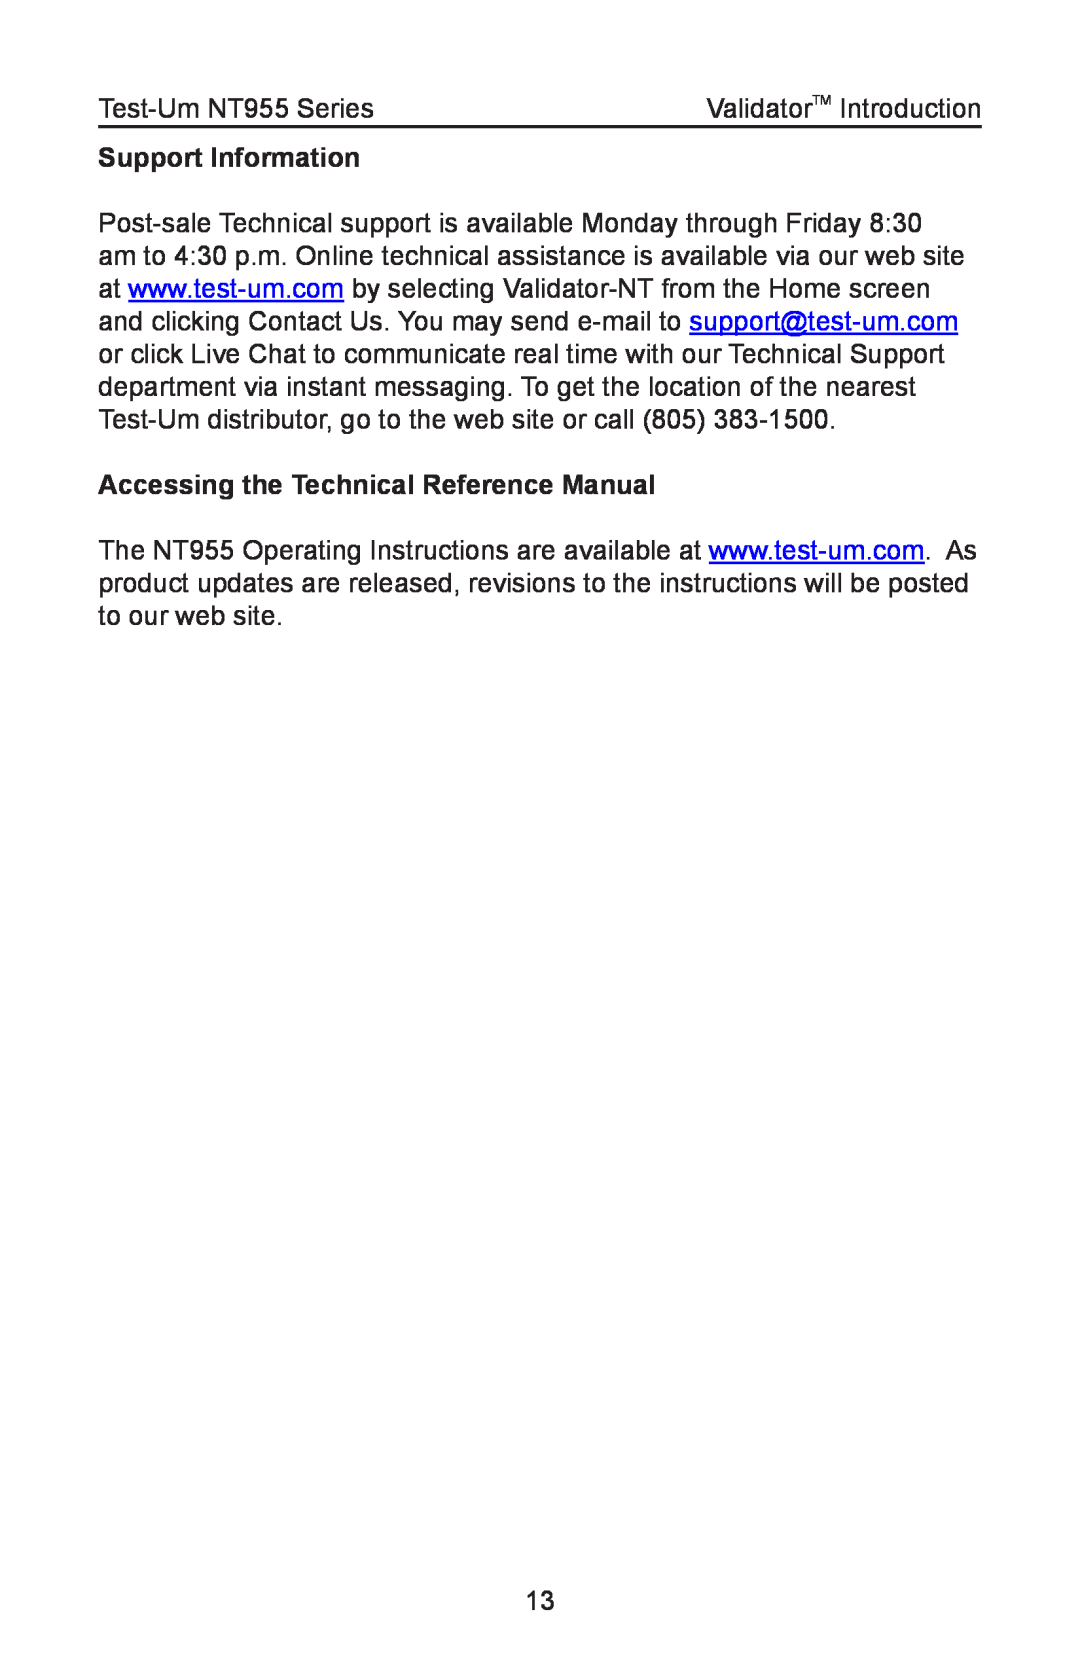 Test-Um Support Information, Accessing the Technical Reference Manual, Test-Um NT955 Series, ValidatorTM Introduction 